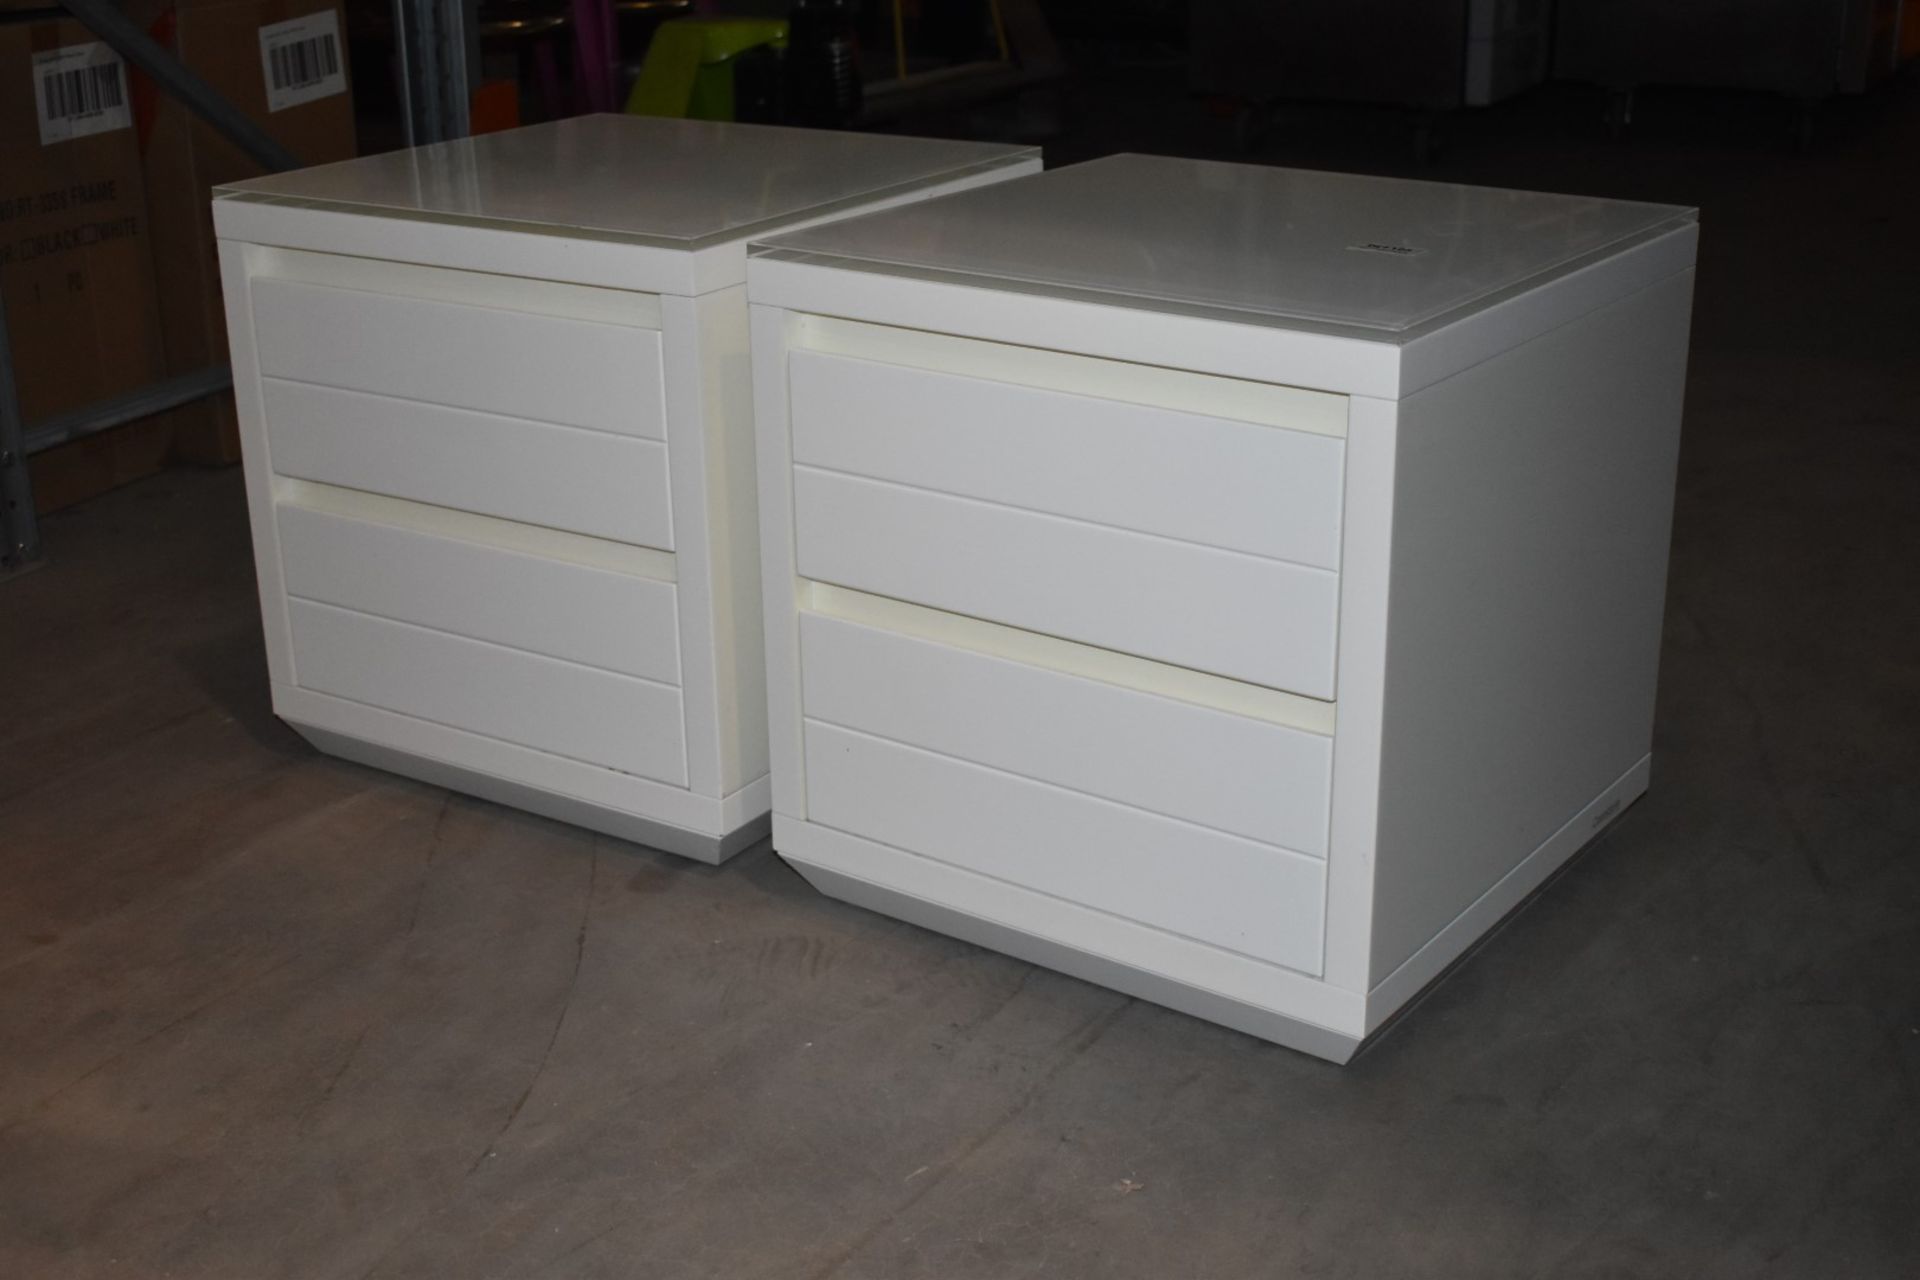 1 Pair of Casabella Adria Bedside Drawers - White Gloss With Glass Top and Soft Close Drawers  - - Image 2 of 6